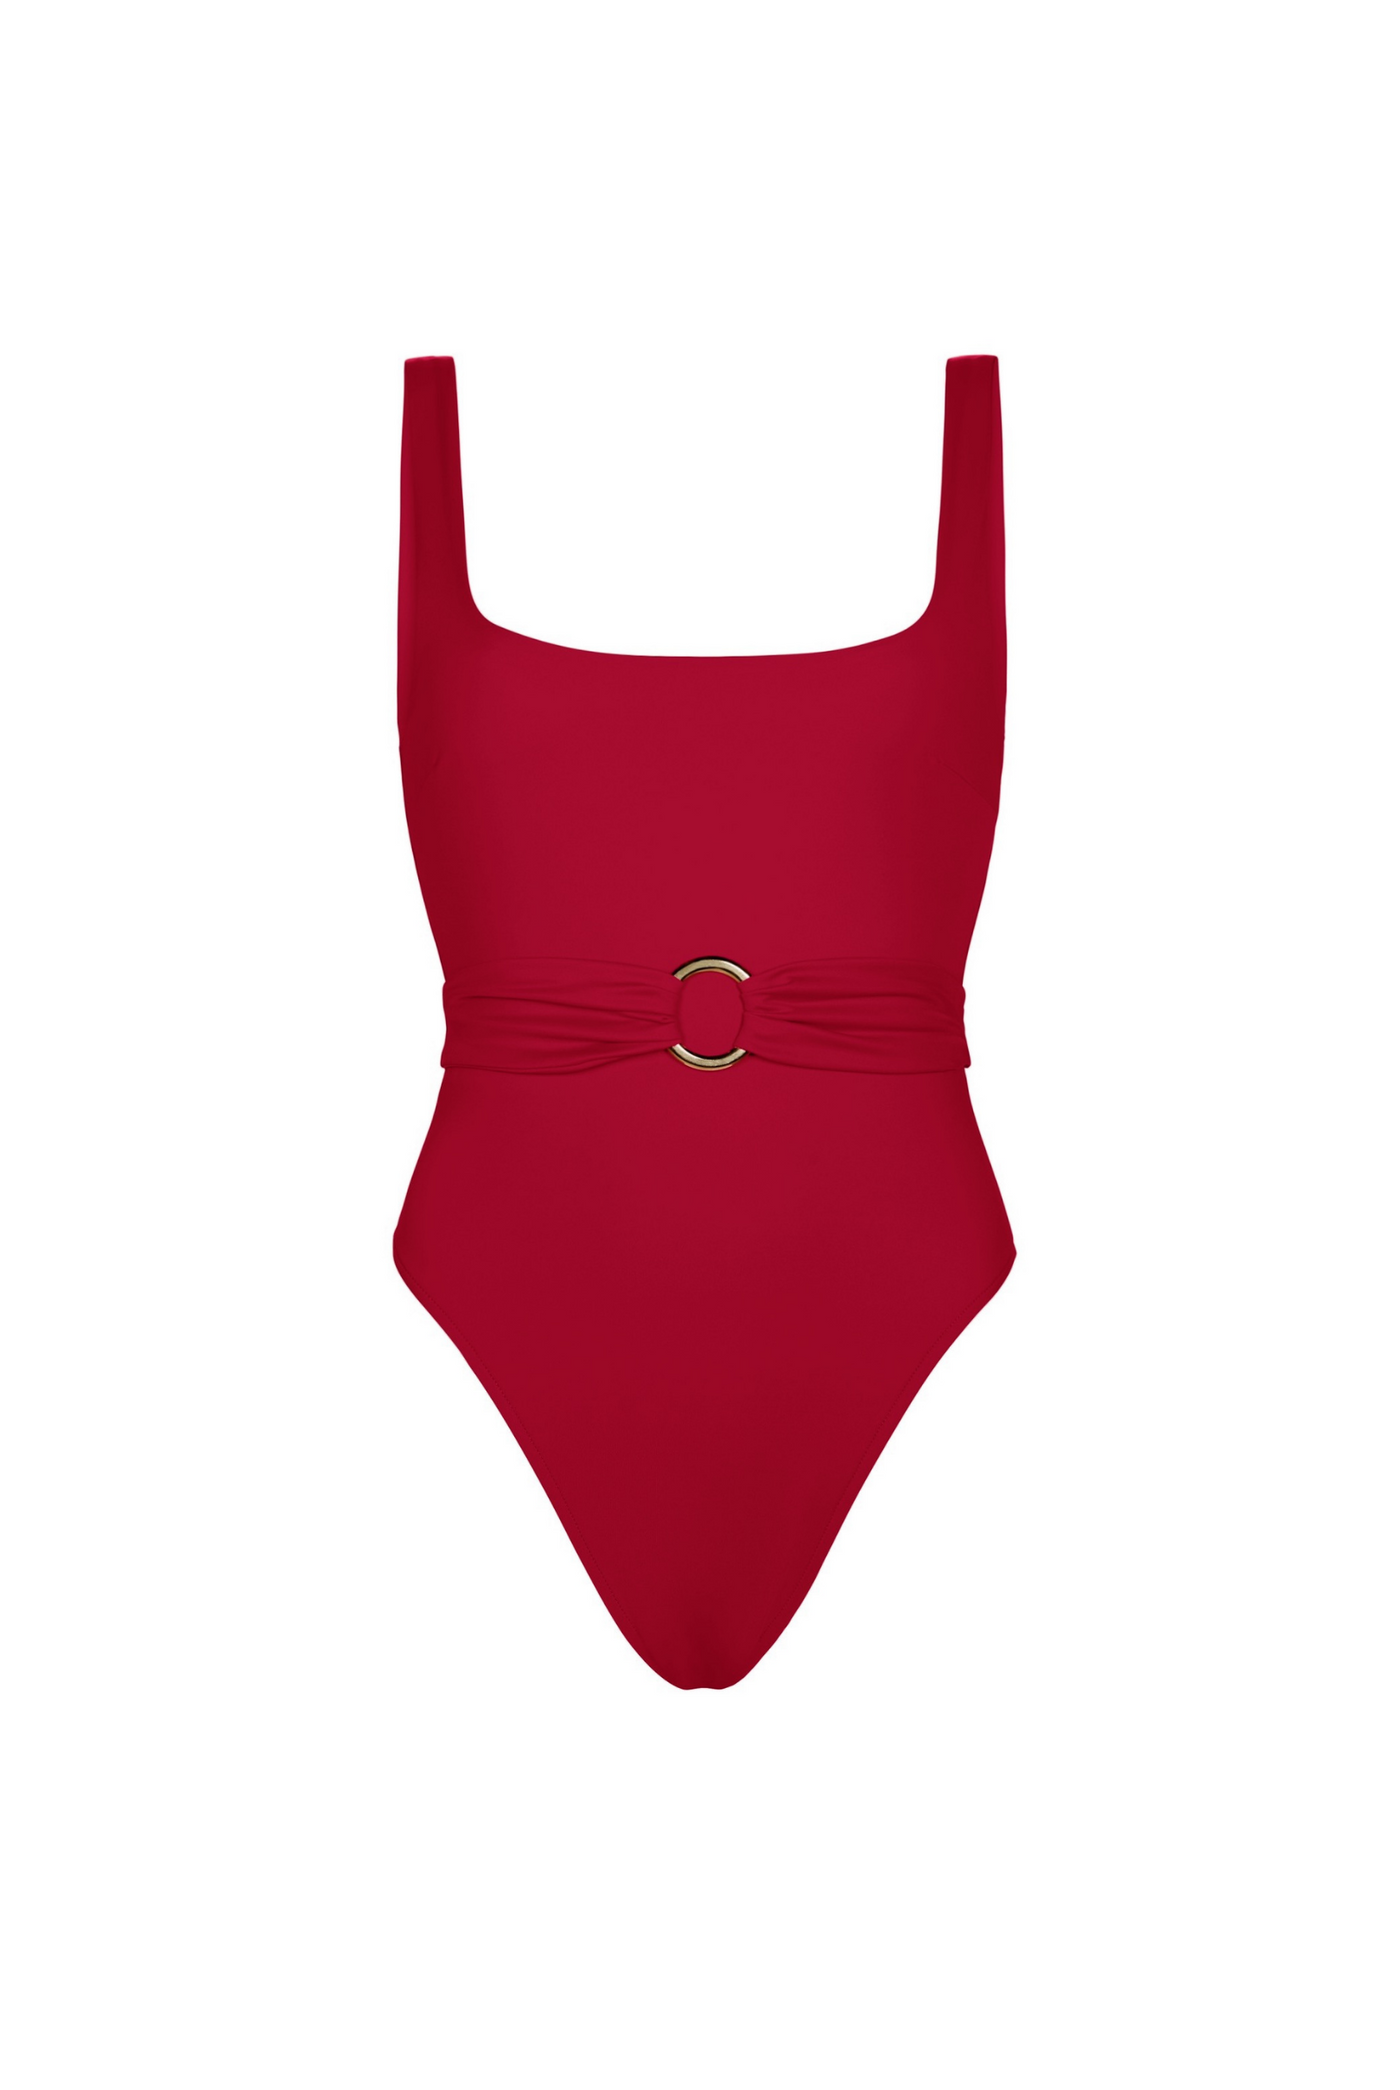 Lake Como One Piece - Red (Final Sale)